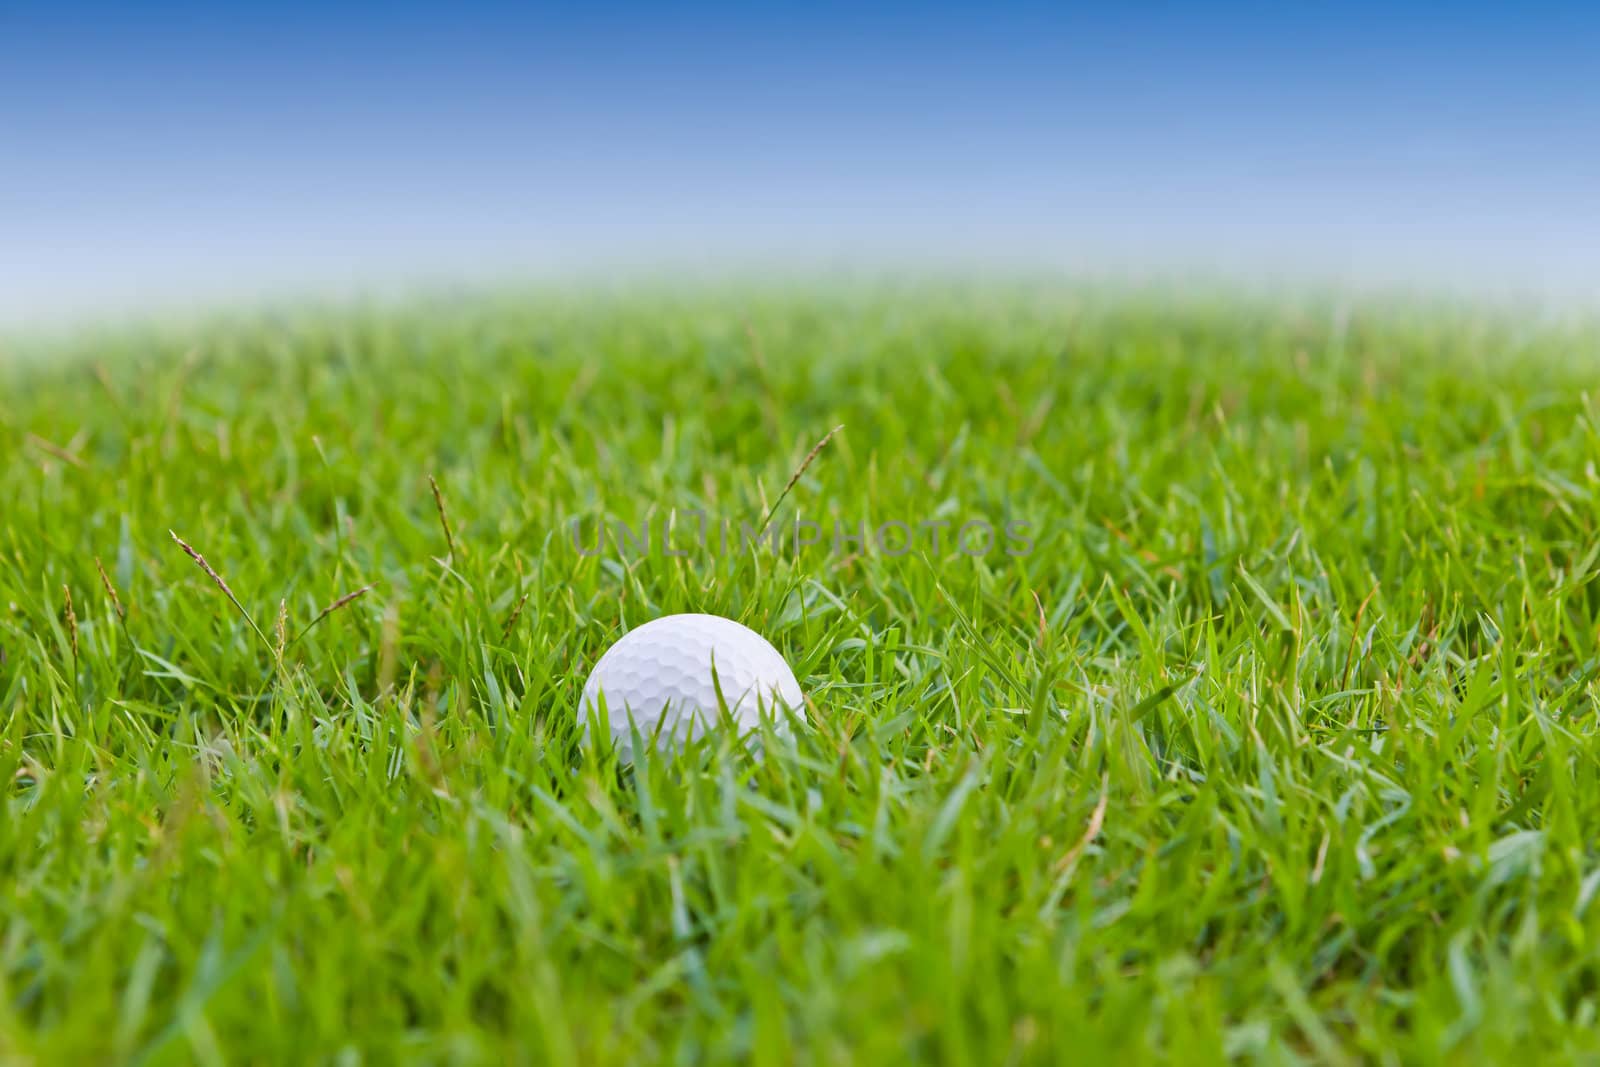 golf ball on grass by tungphoto